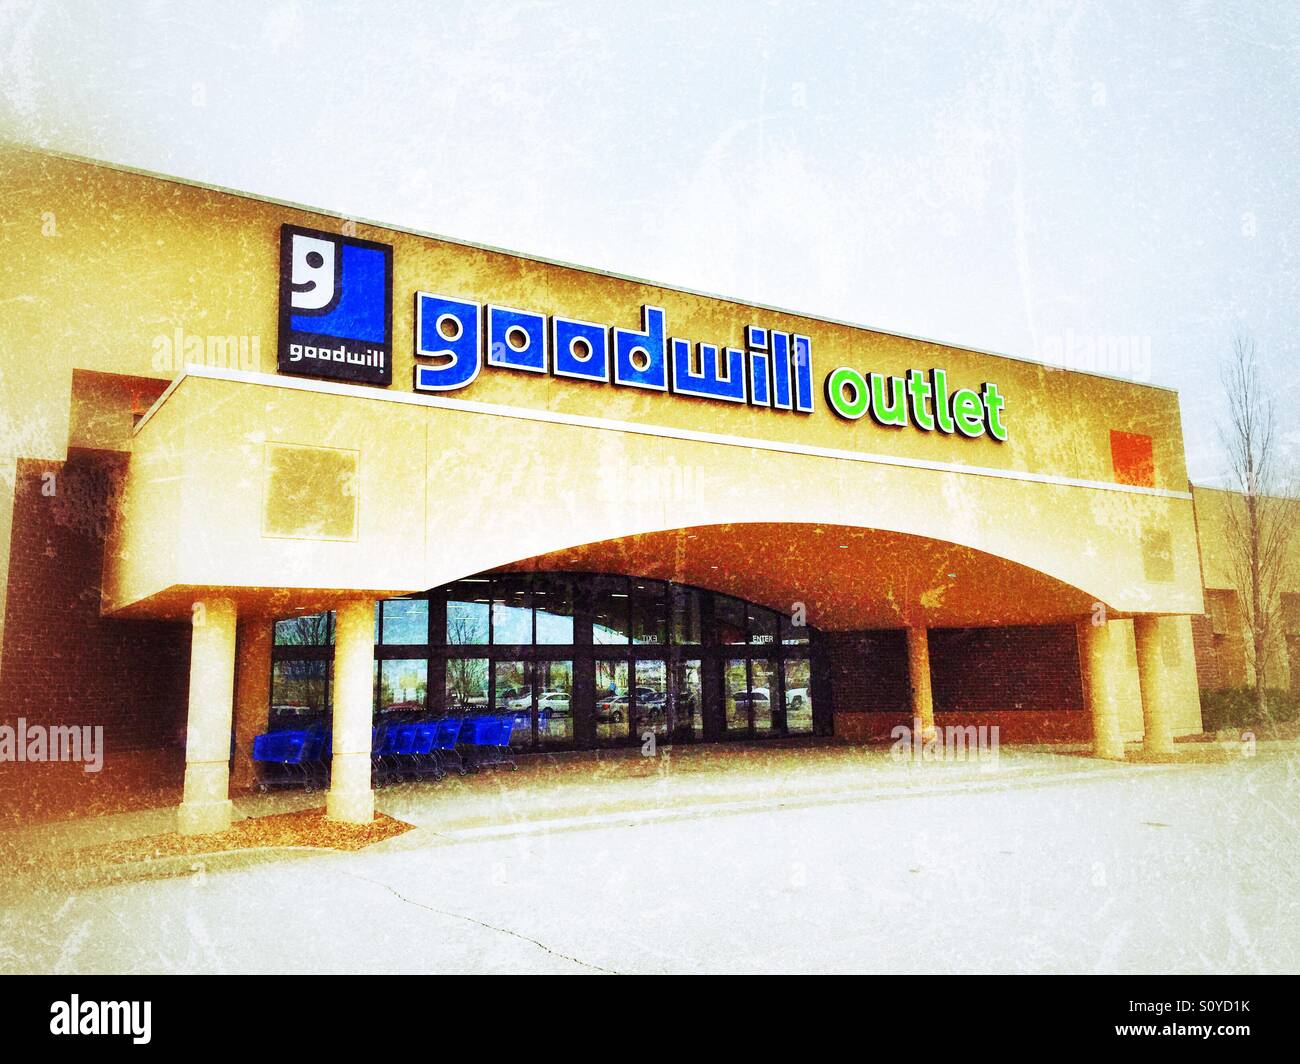 Goodwill Outlet Thrift Store Stock Photo